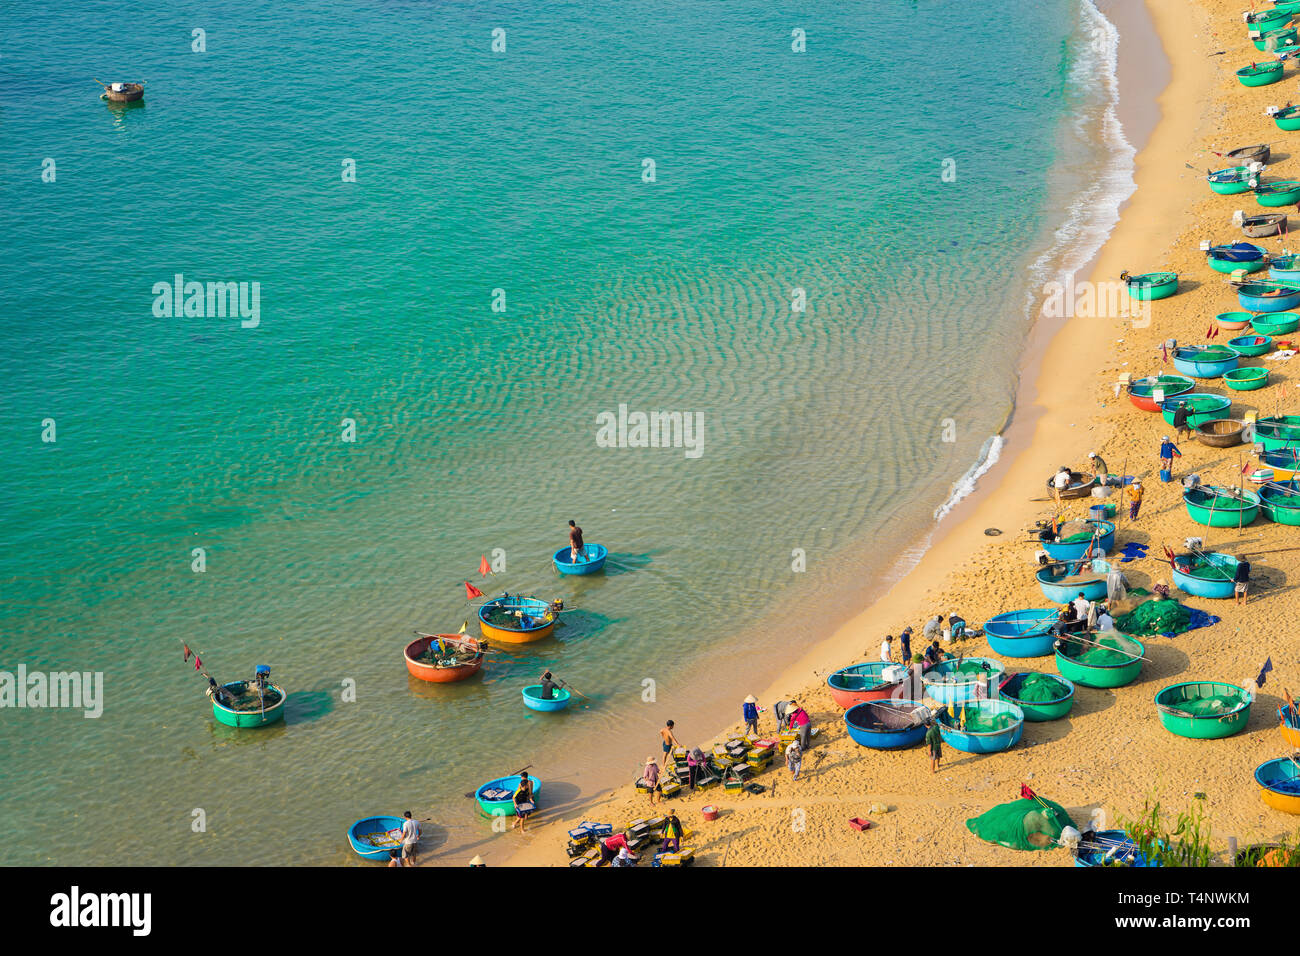 Aerial view of Quy Nhon beach with curved shore line in Binh Dinh province, Vietnam Stock Photo